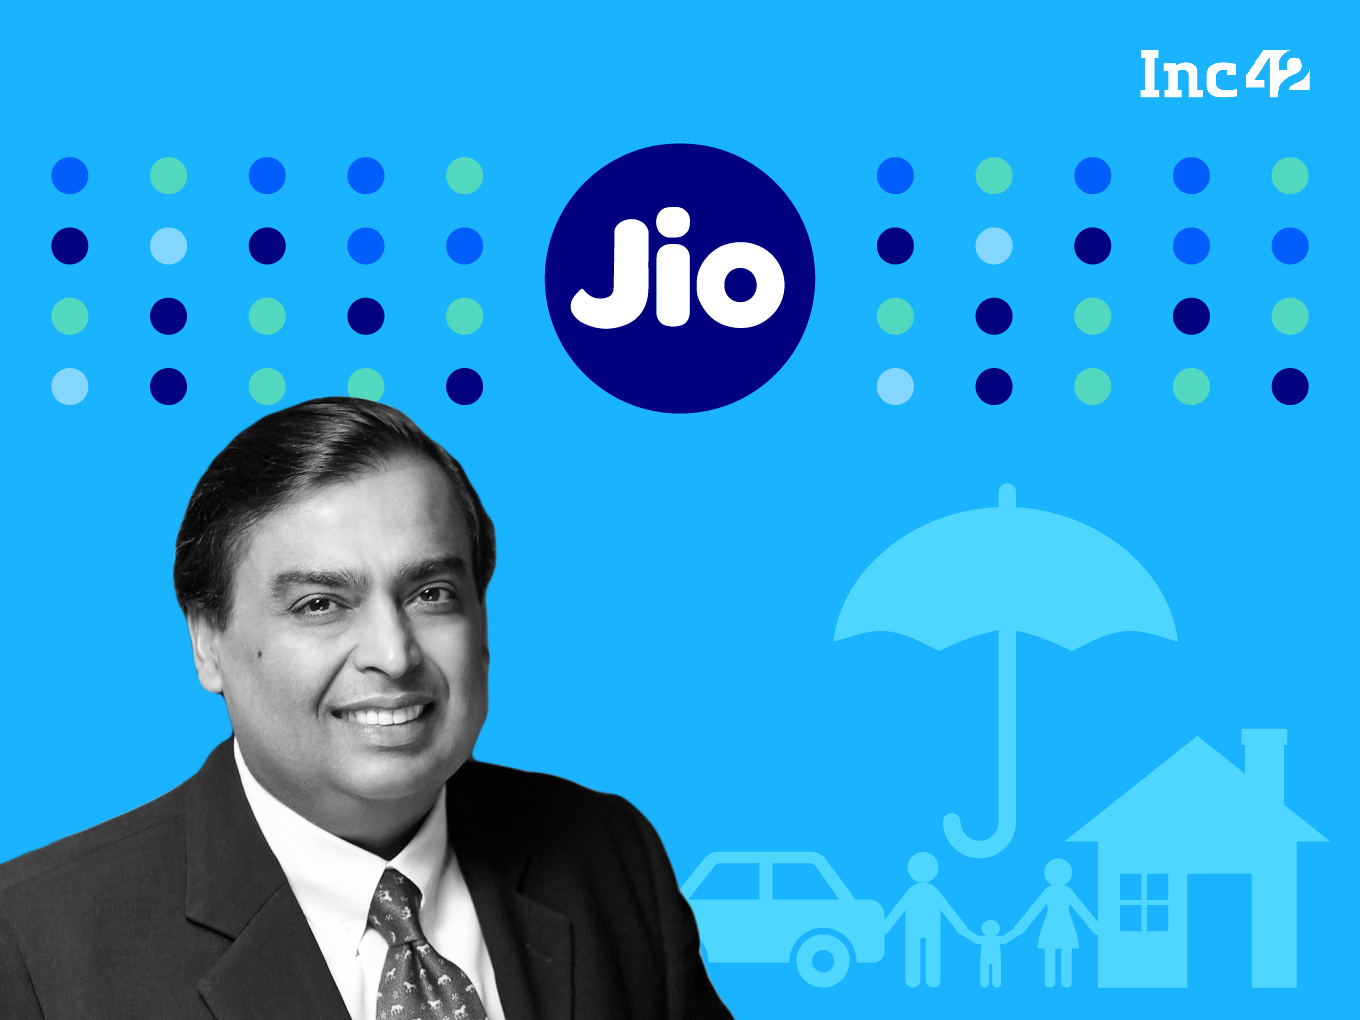 Jio New Recharge Plan Only Rs.131